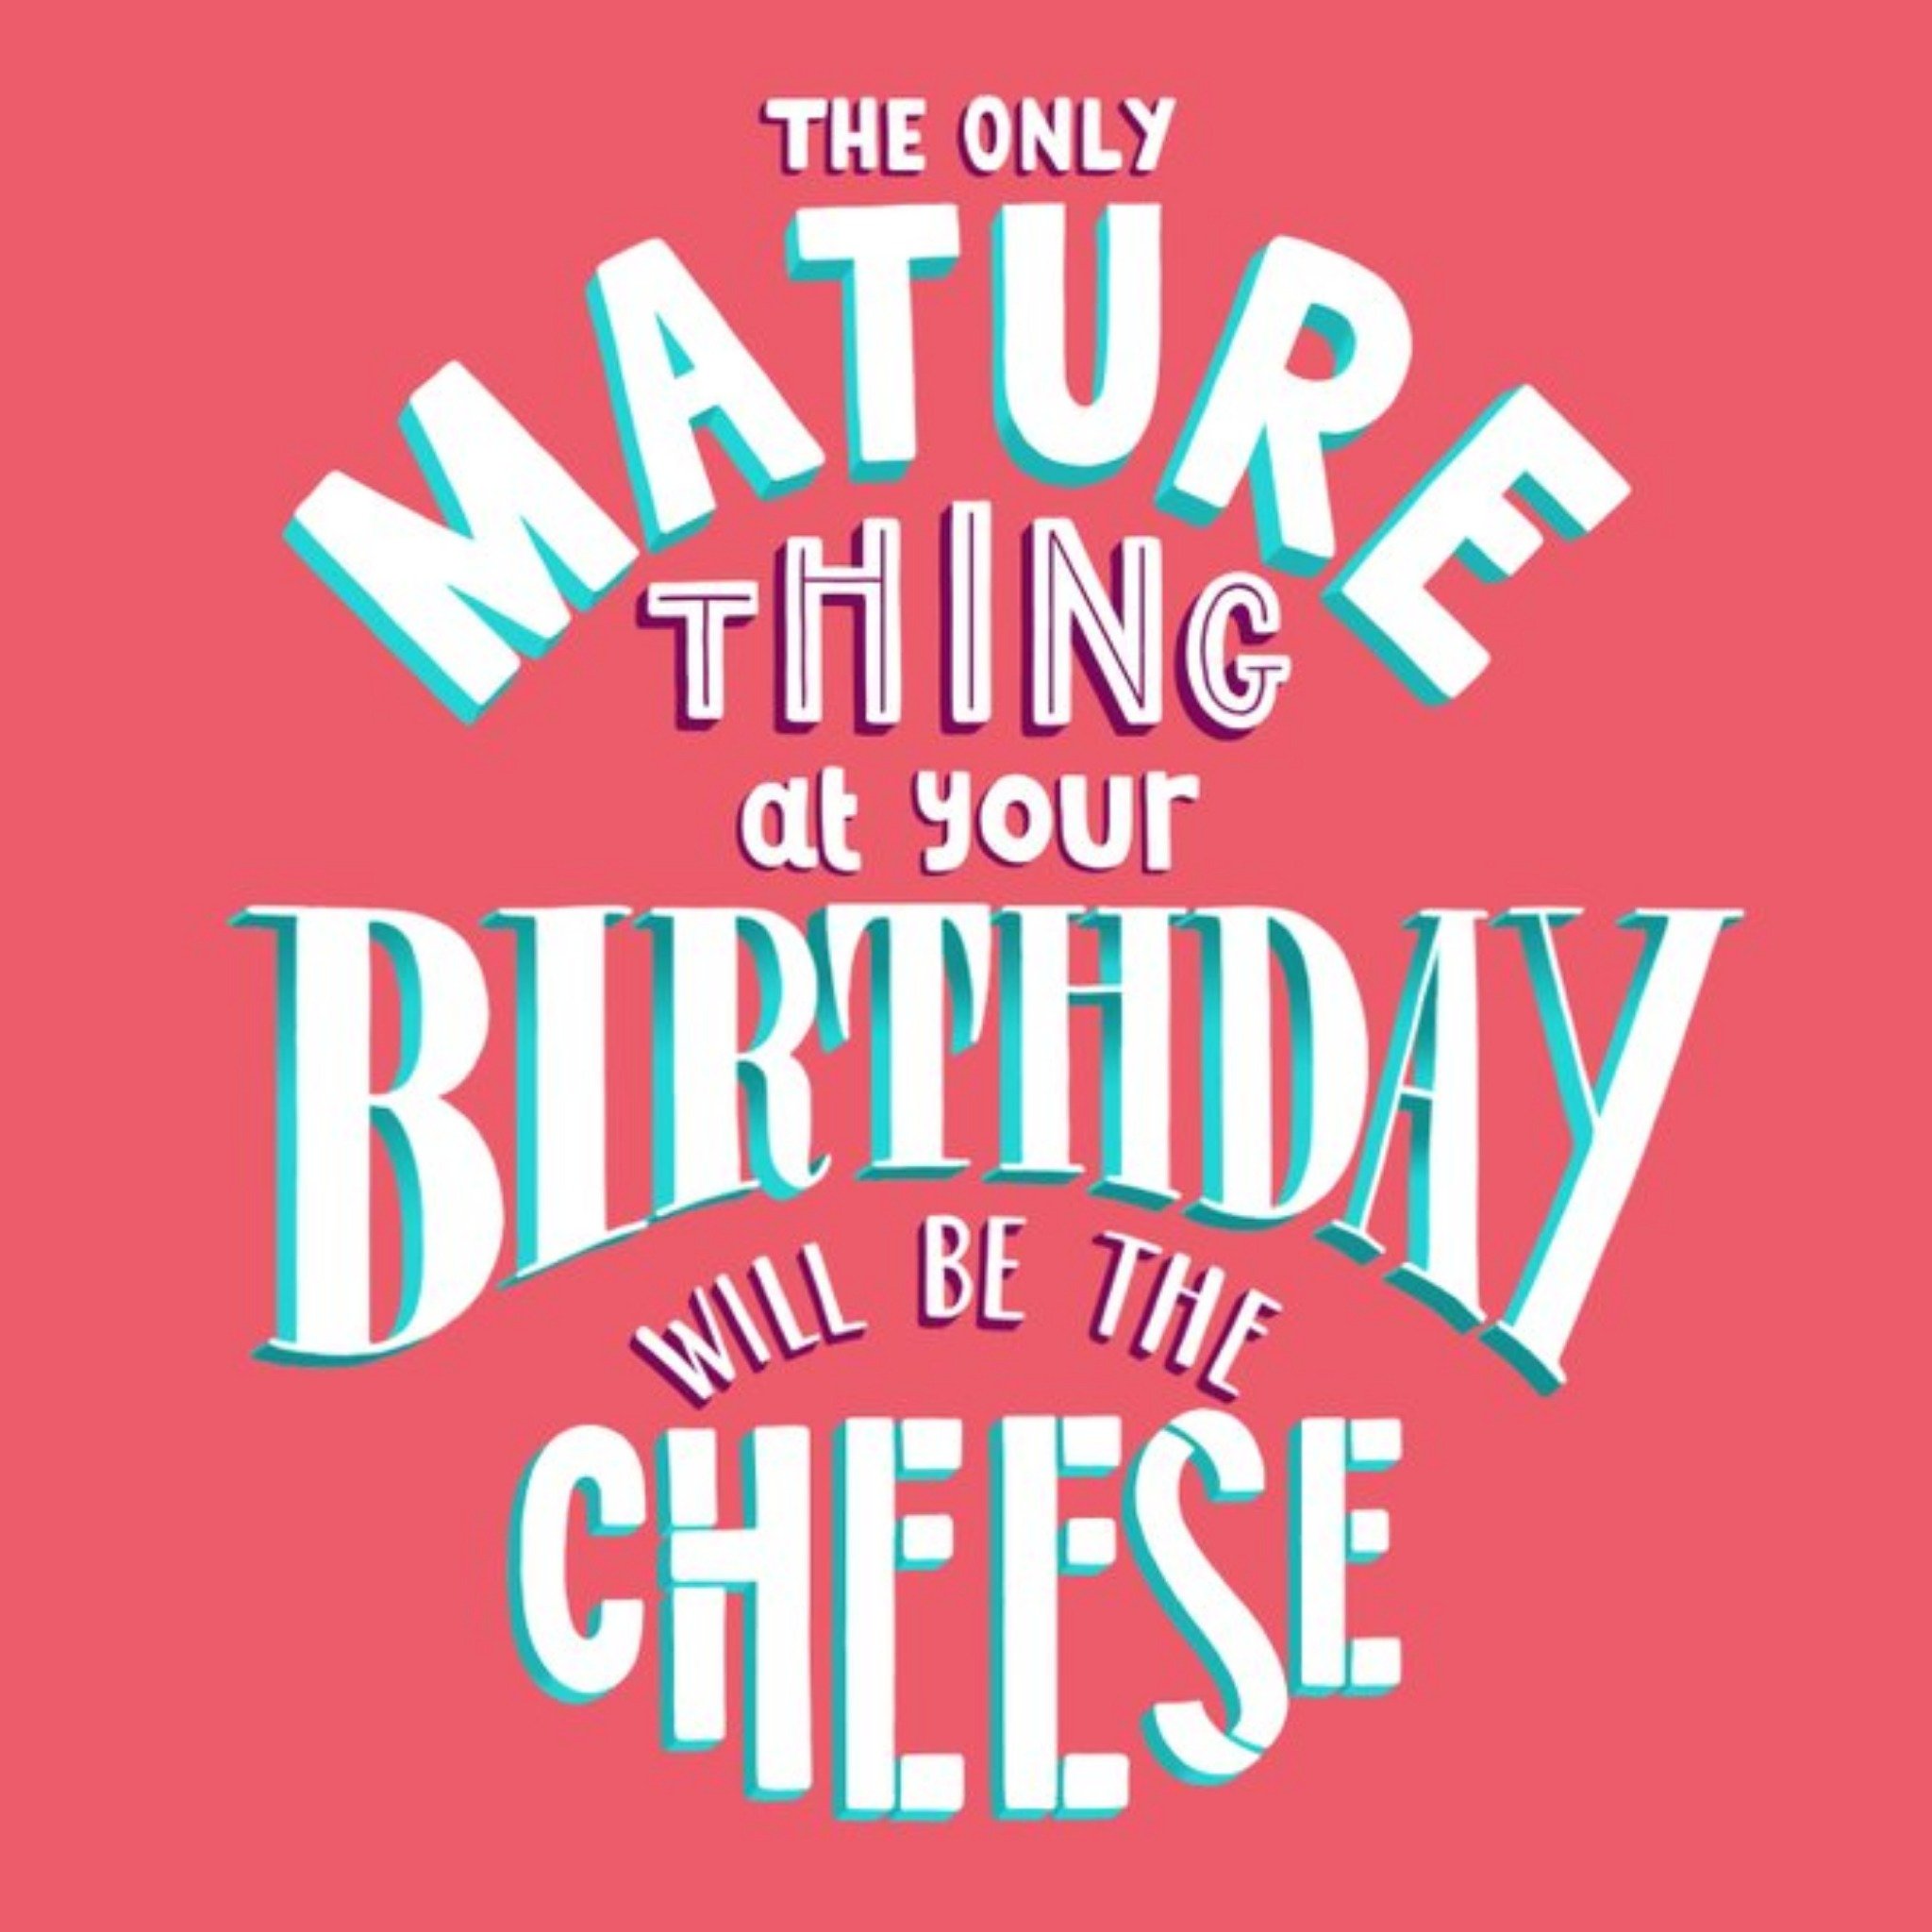 Moonpig The Only Thing Mature At Your Birthday Will Be The Cheese Card, Large